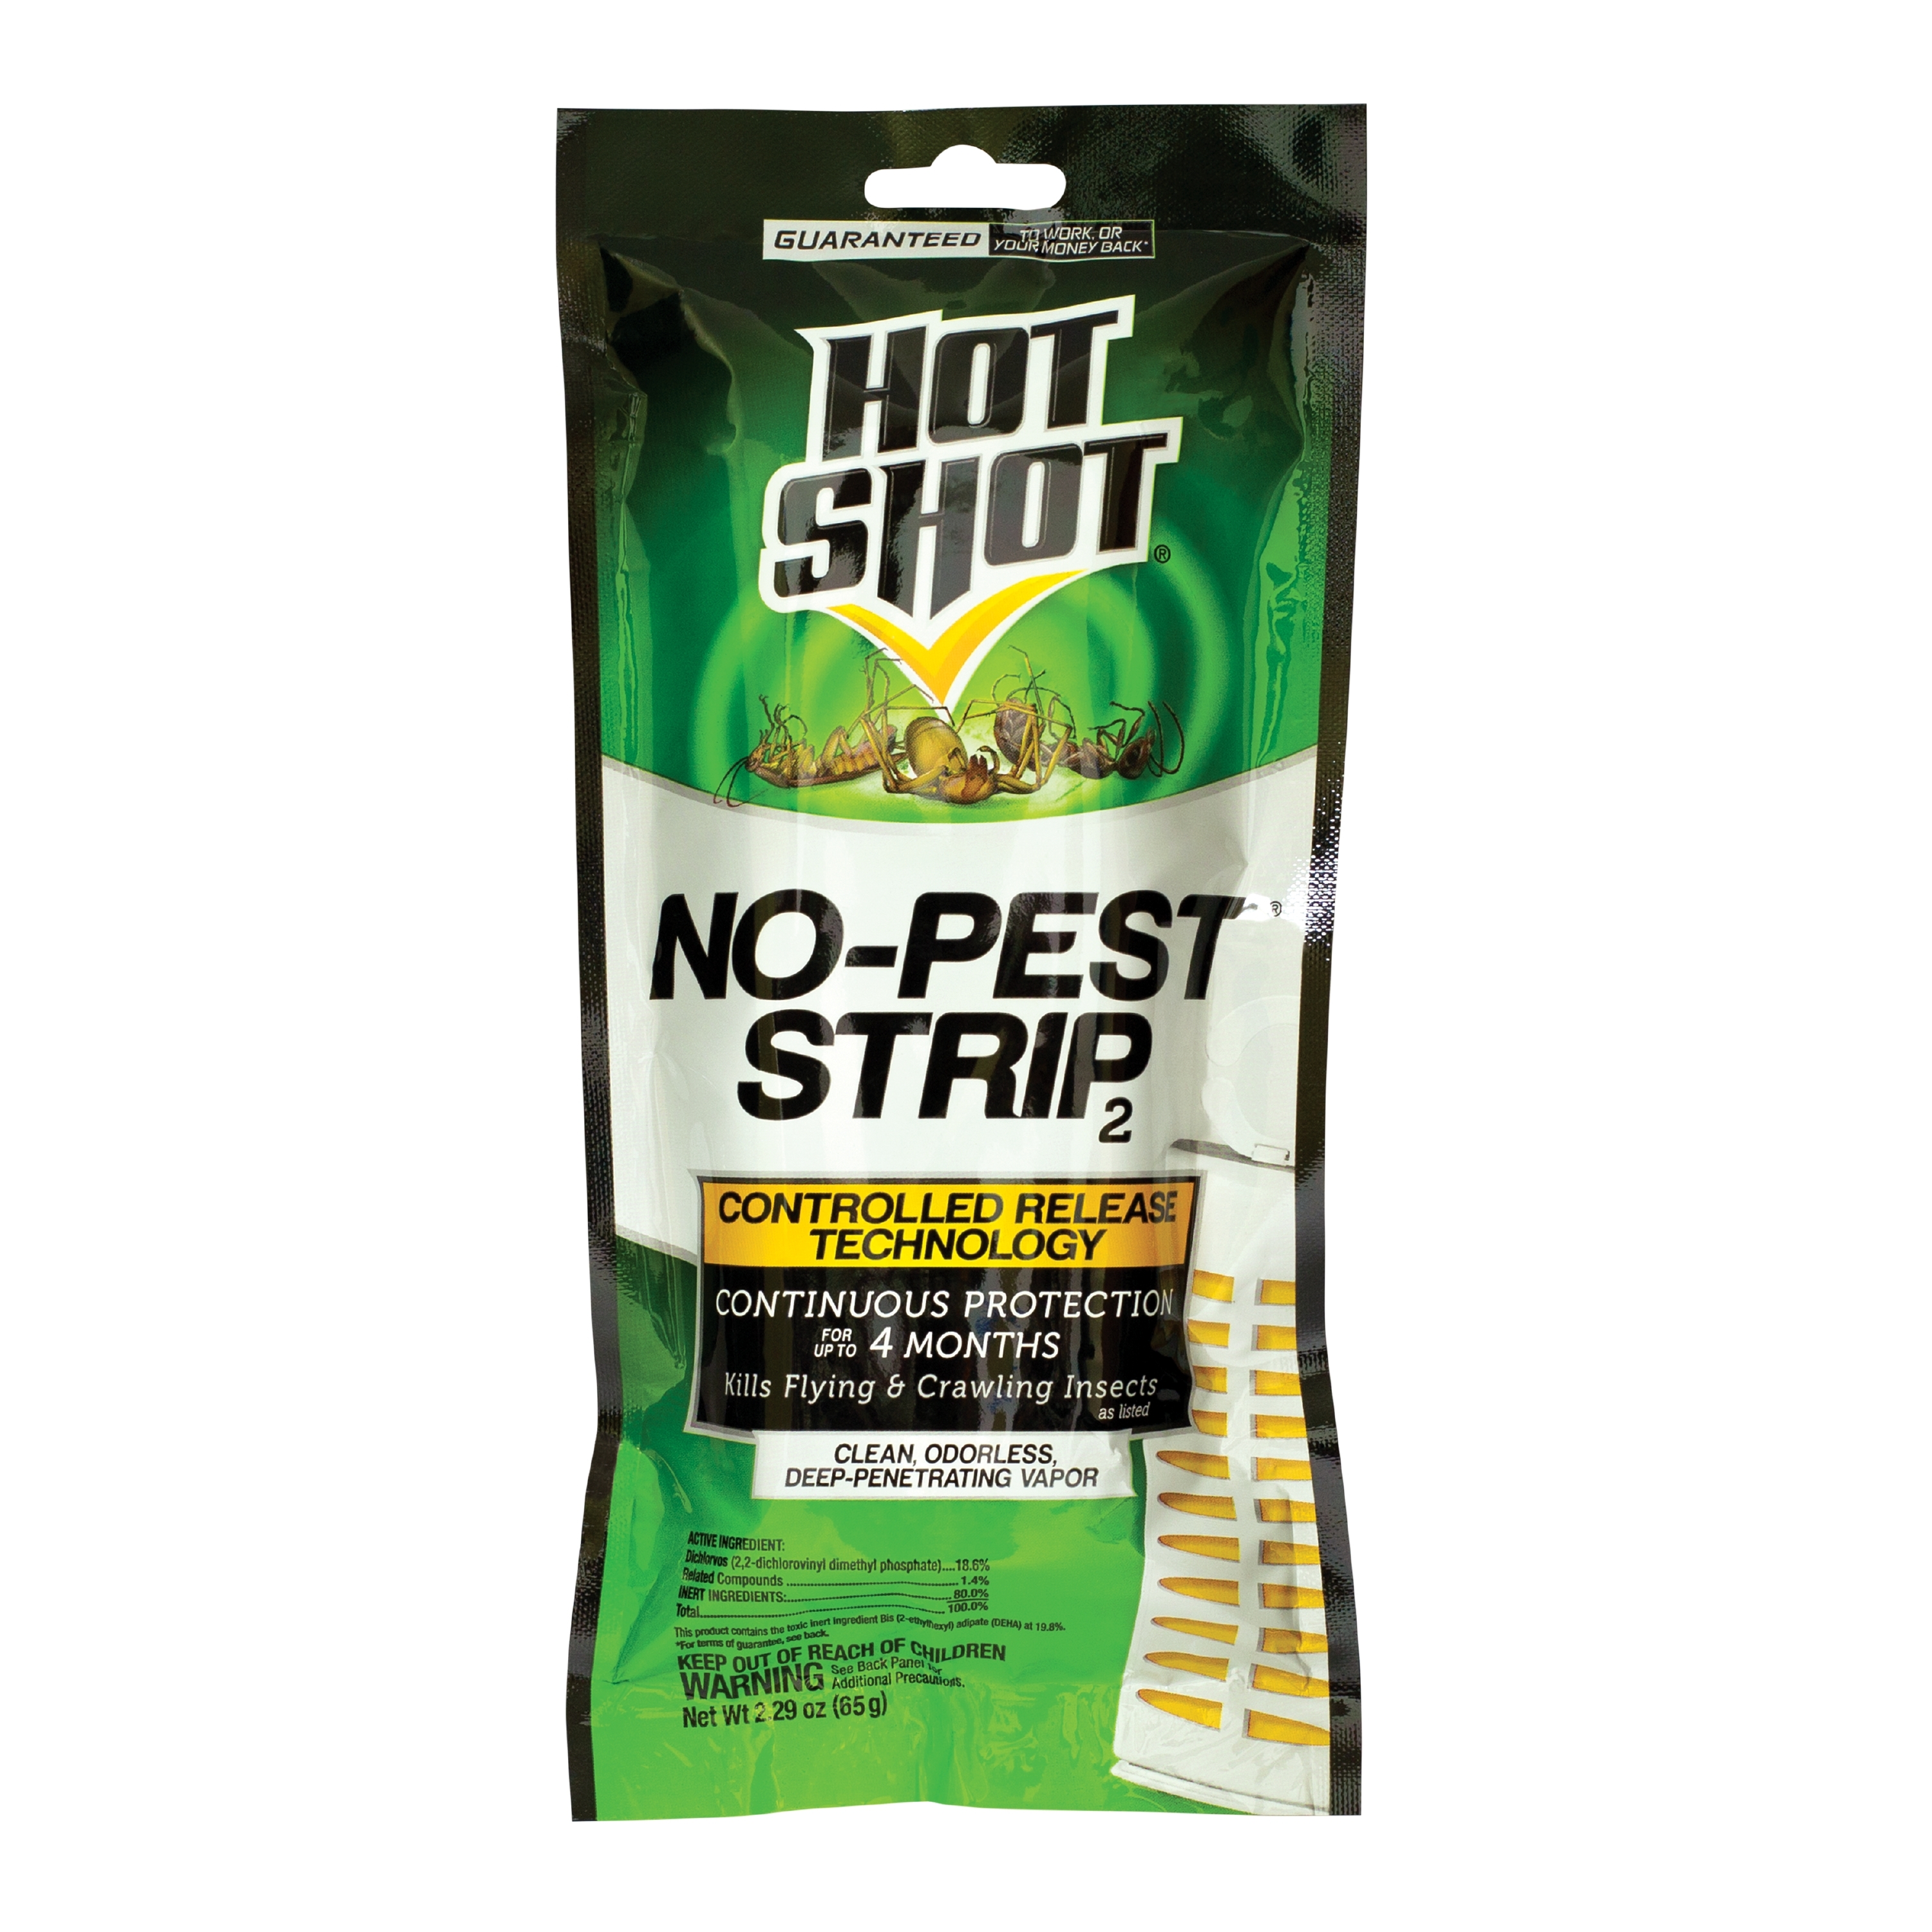 Hot Shot No-Pest Strip, Controlled Release Technology, 1-Count - image 1 of 5